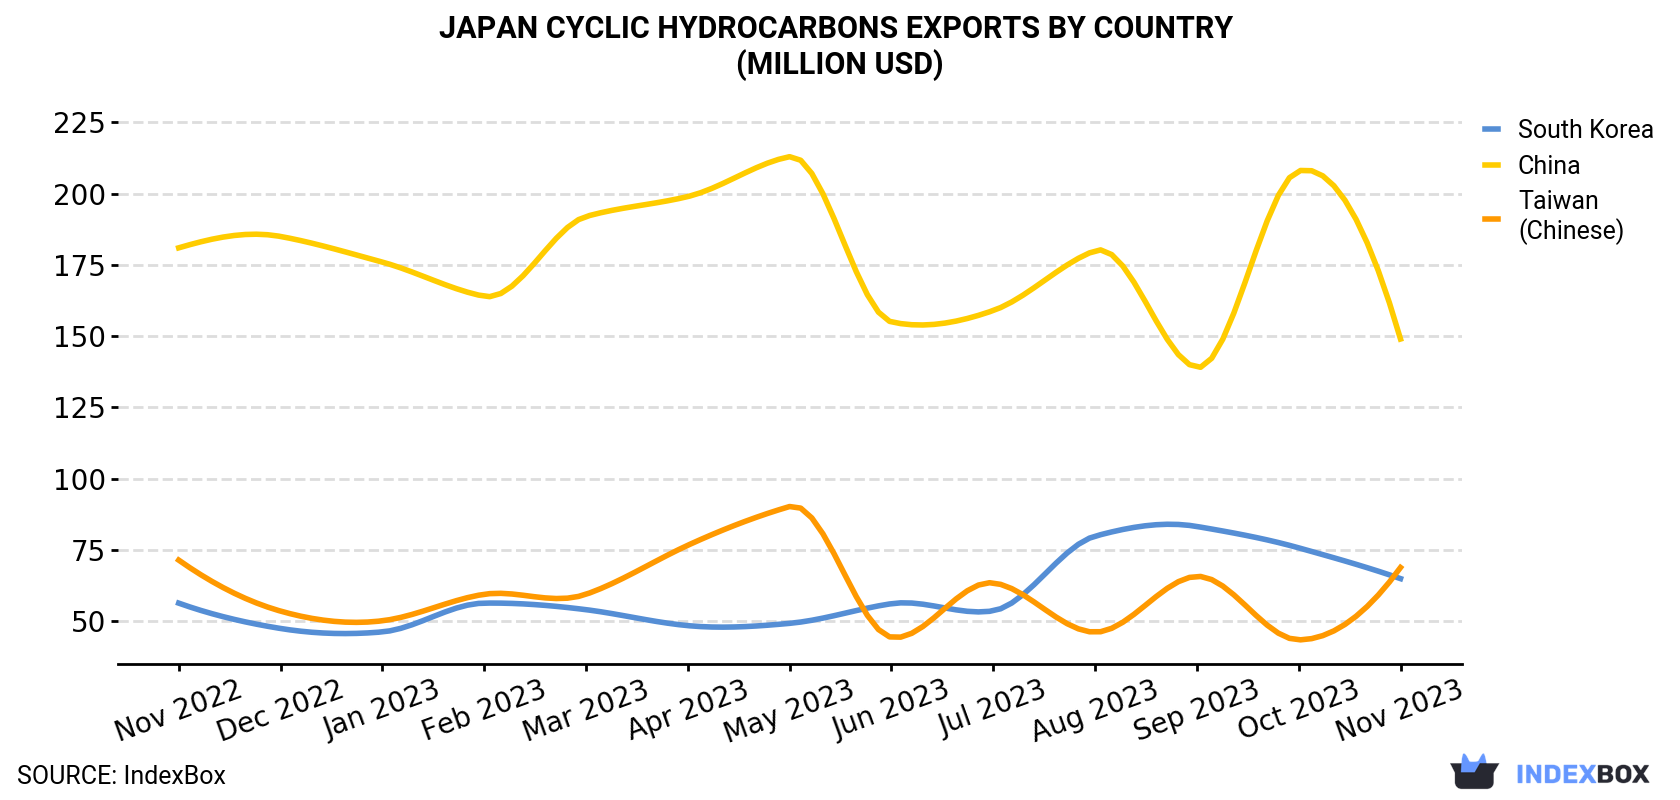 Japan Cyclic Hydrocarbons Exports By Country (Million USD)